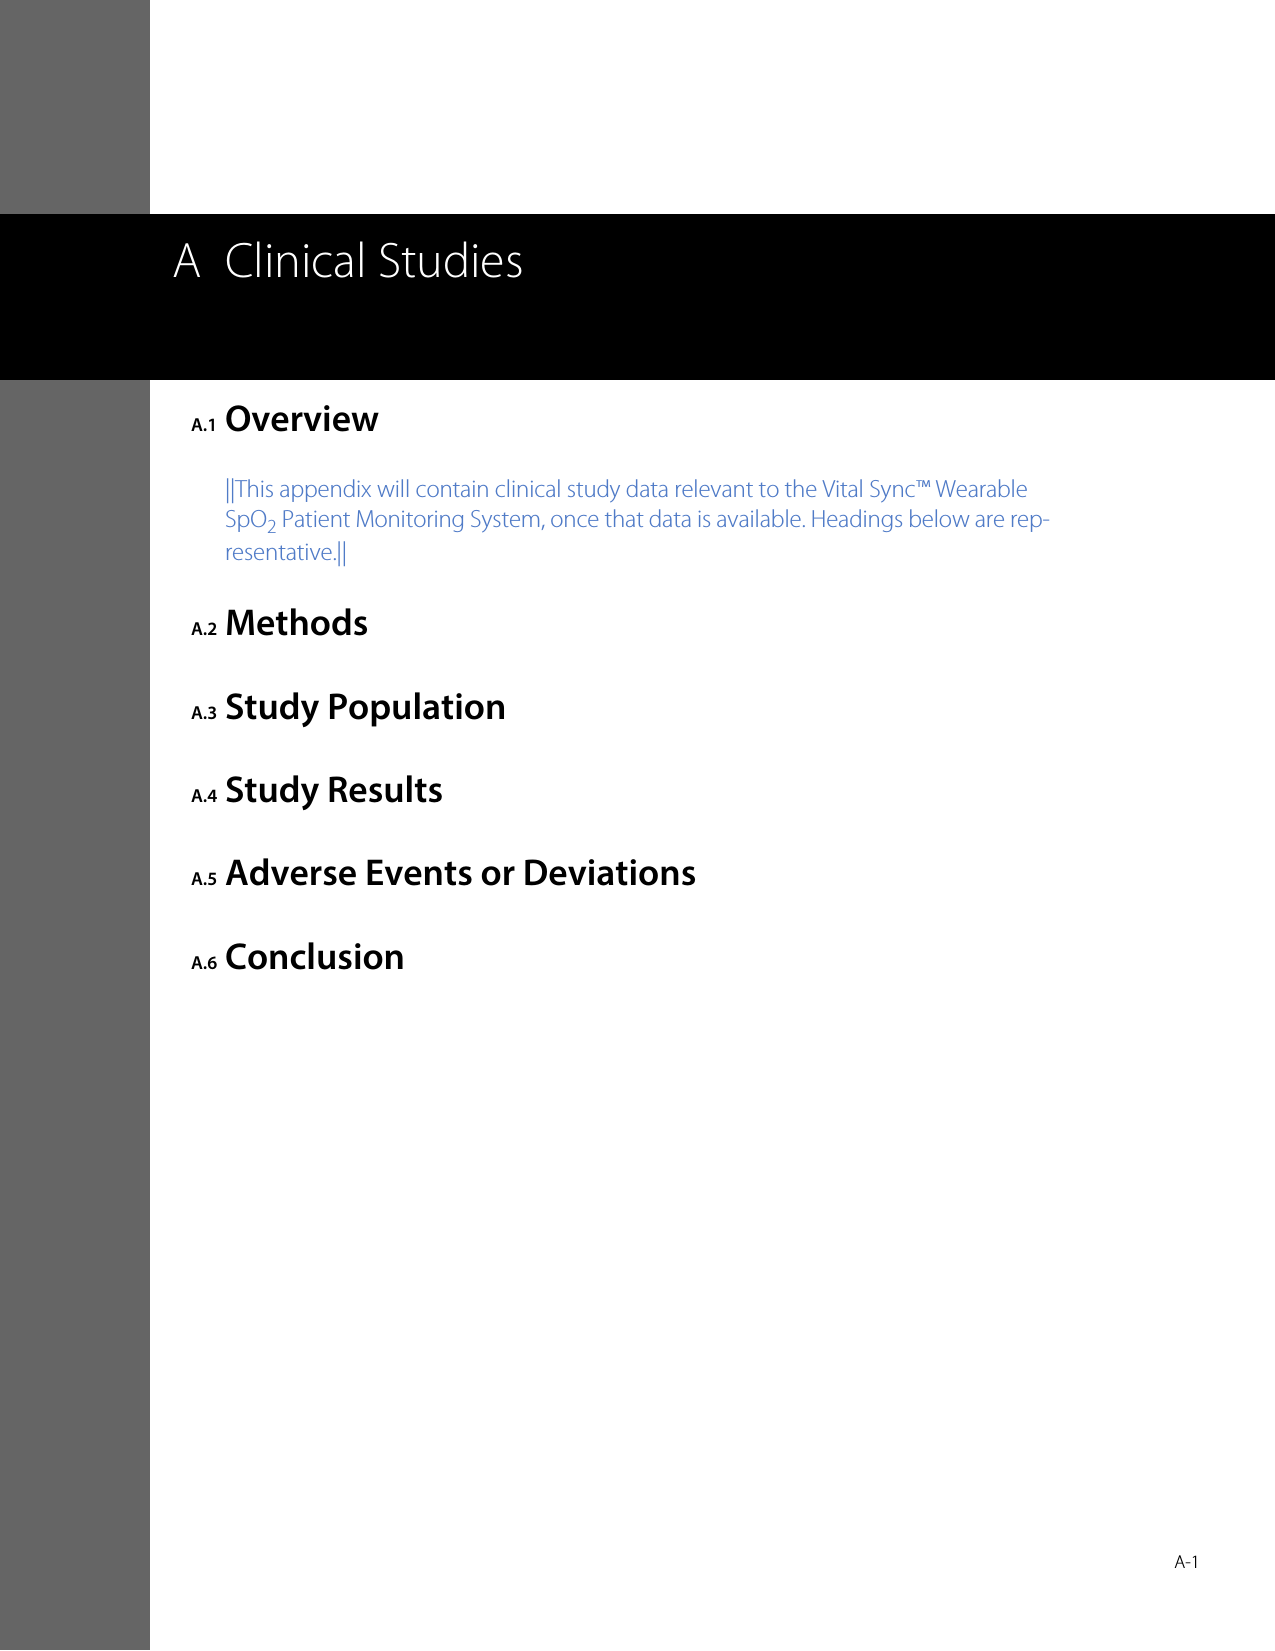  A-1A Clinical StudiesA.1 Overview||This appendix will contain clinical study data relevant to the Vital Sync™ Wearable SpO2 Patient Monitoring System, once that data is available. Headings below are rep-resentative.||A.2 MethodsA.3 Study PopulationA.4 Study ResultsA.5 Adverse Events or DeviationsA.6 Conclusion